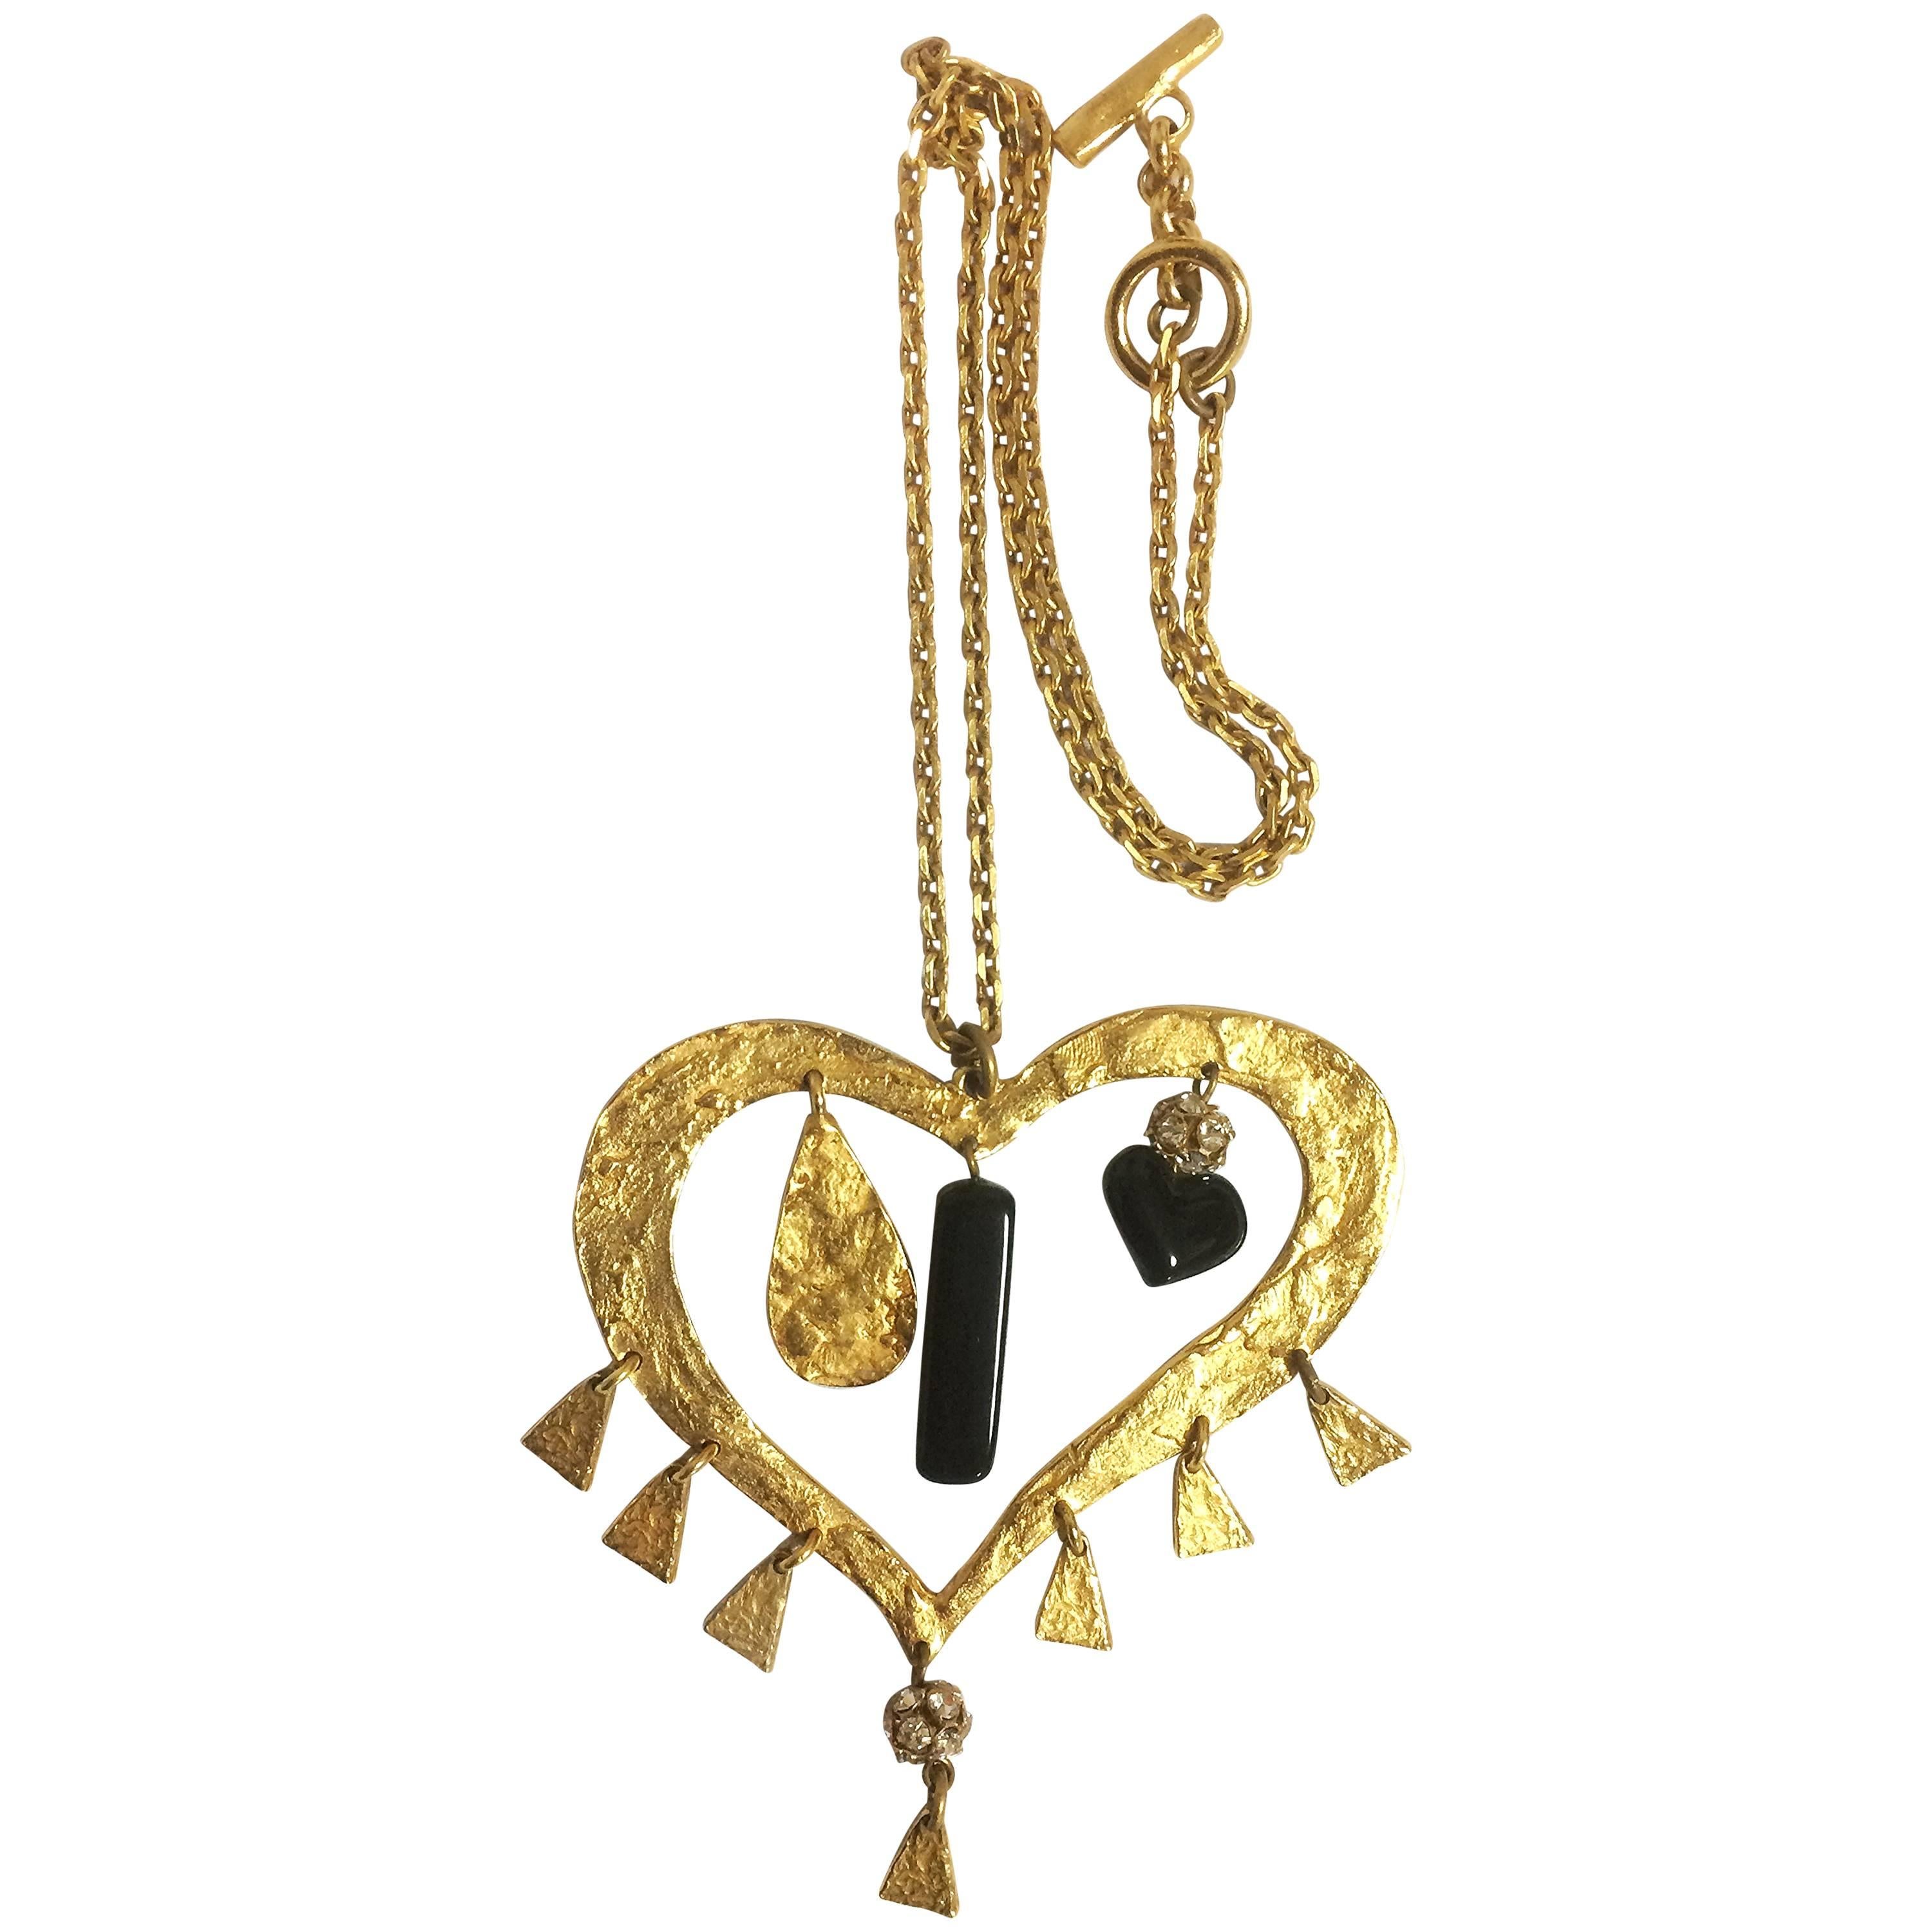 Vintage Christian Lacroix golden large heart necklace with dangling charms. For Sale